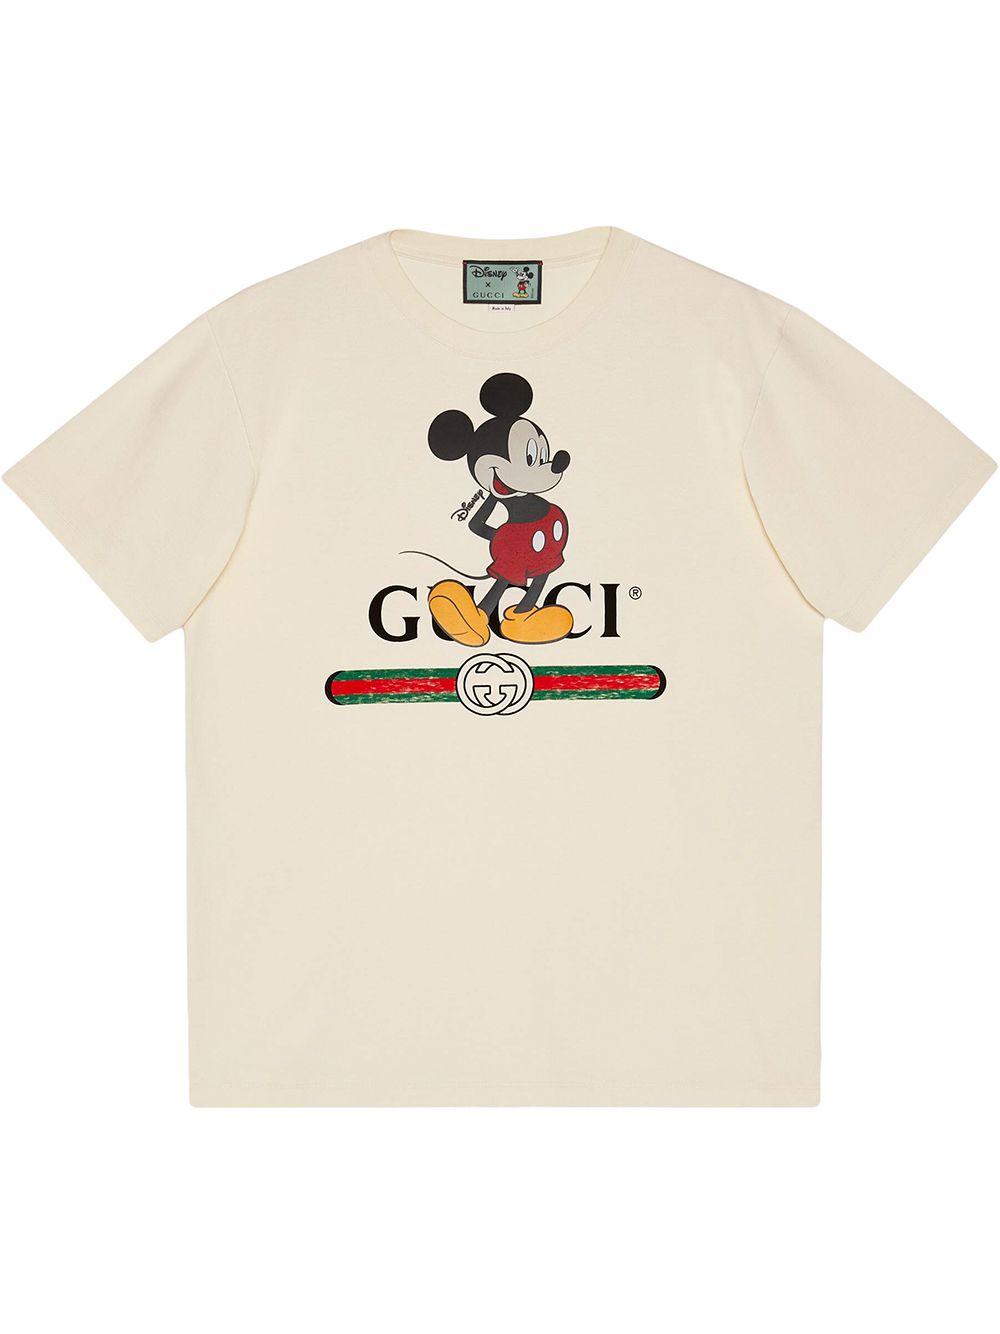 Gucci Disney X Oversize T-shirt in White for Men | Lyst